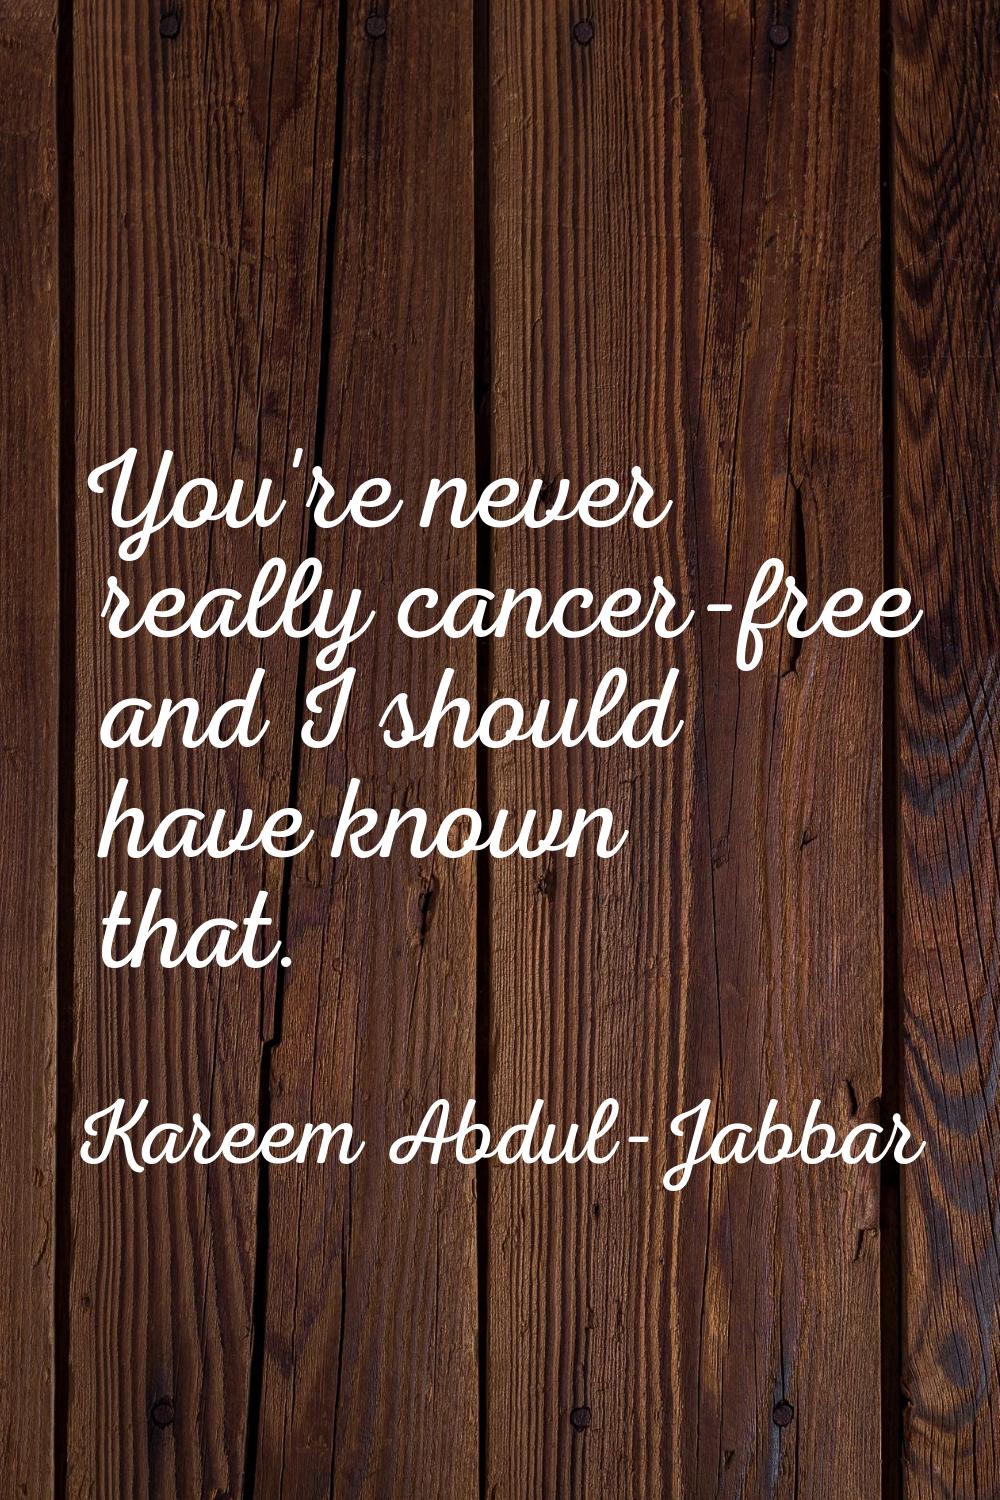 You're never really cancer-free and I should have known that.